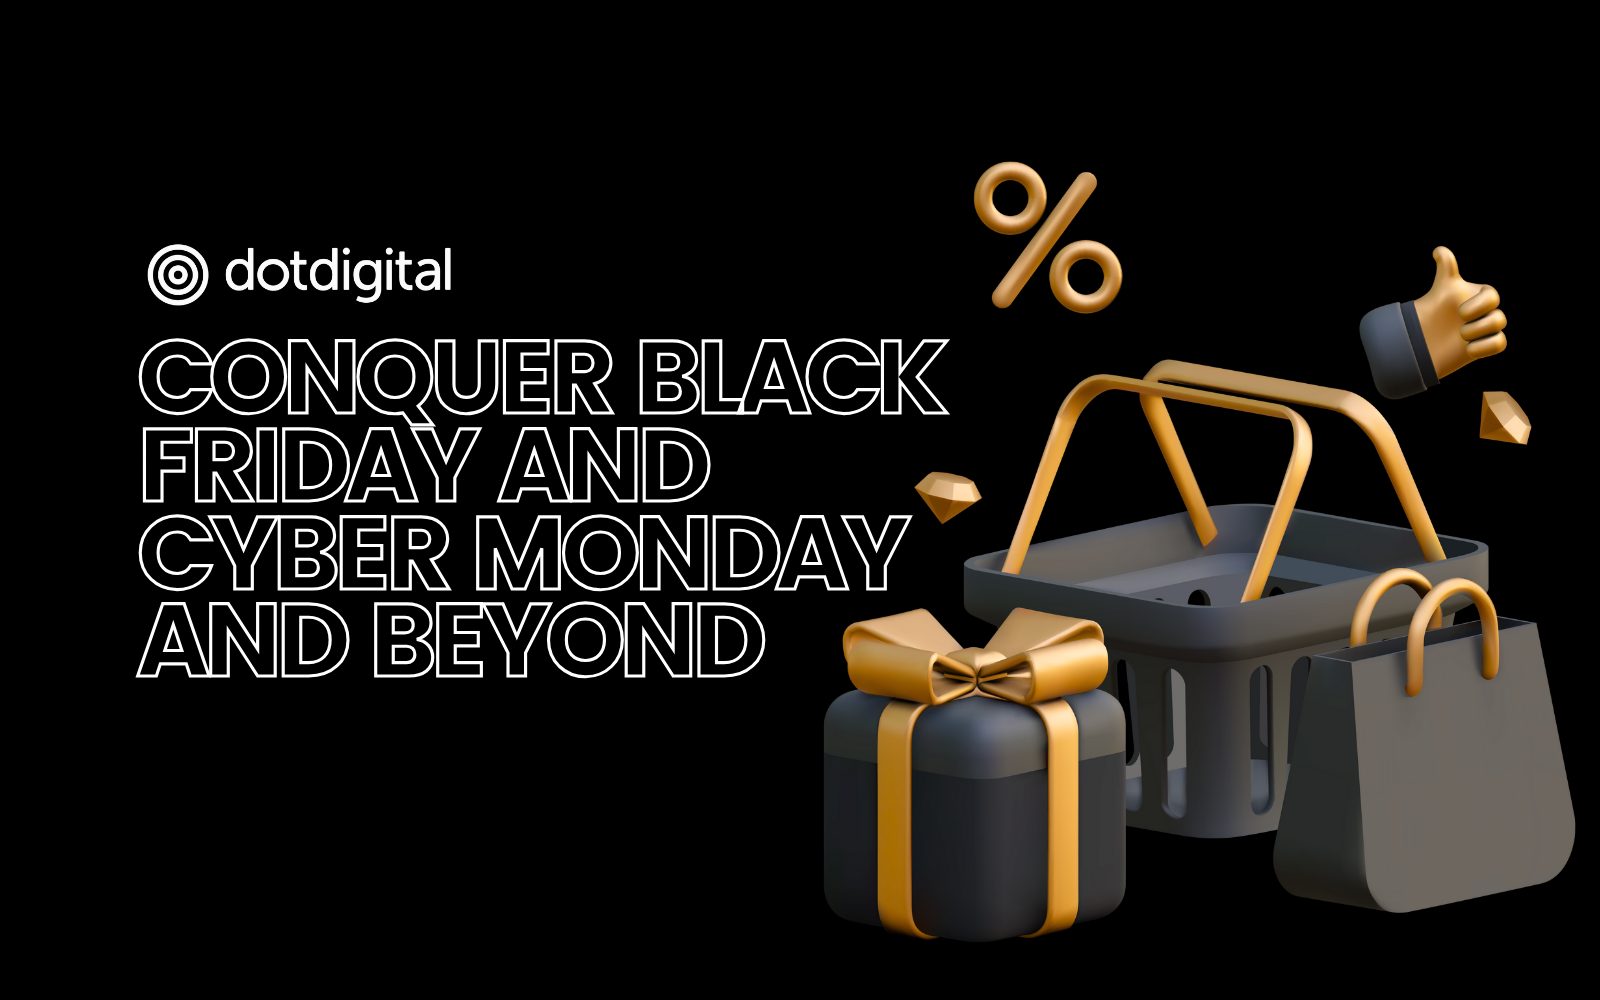 Conquer Black Friday Cyber Monday and beyond